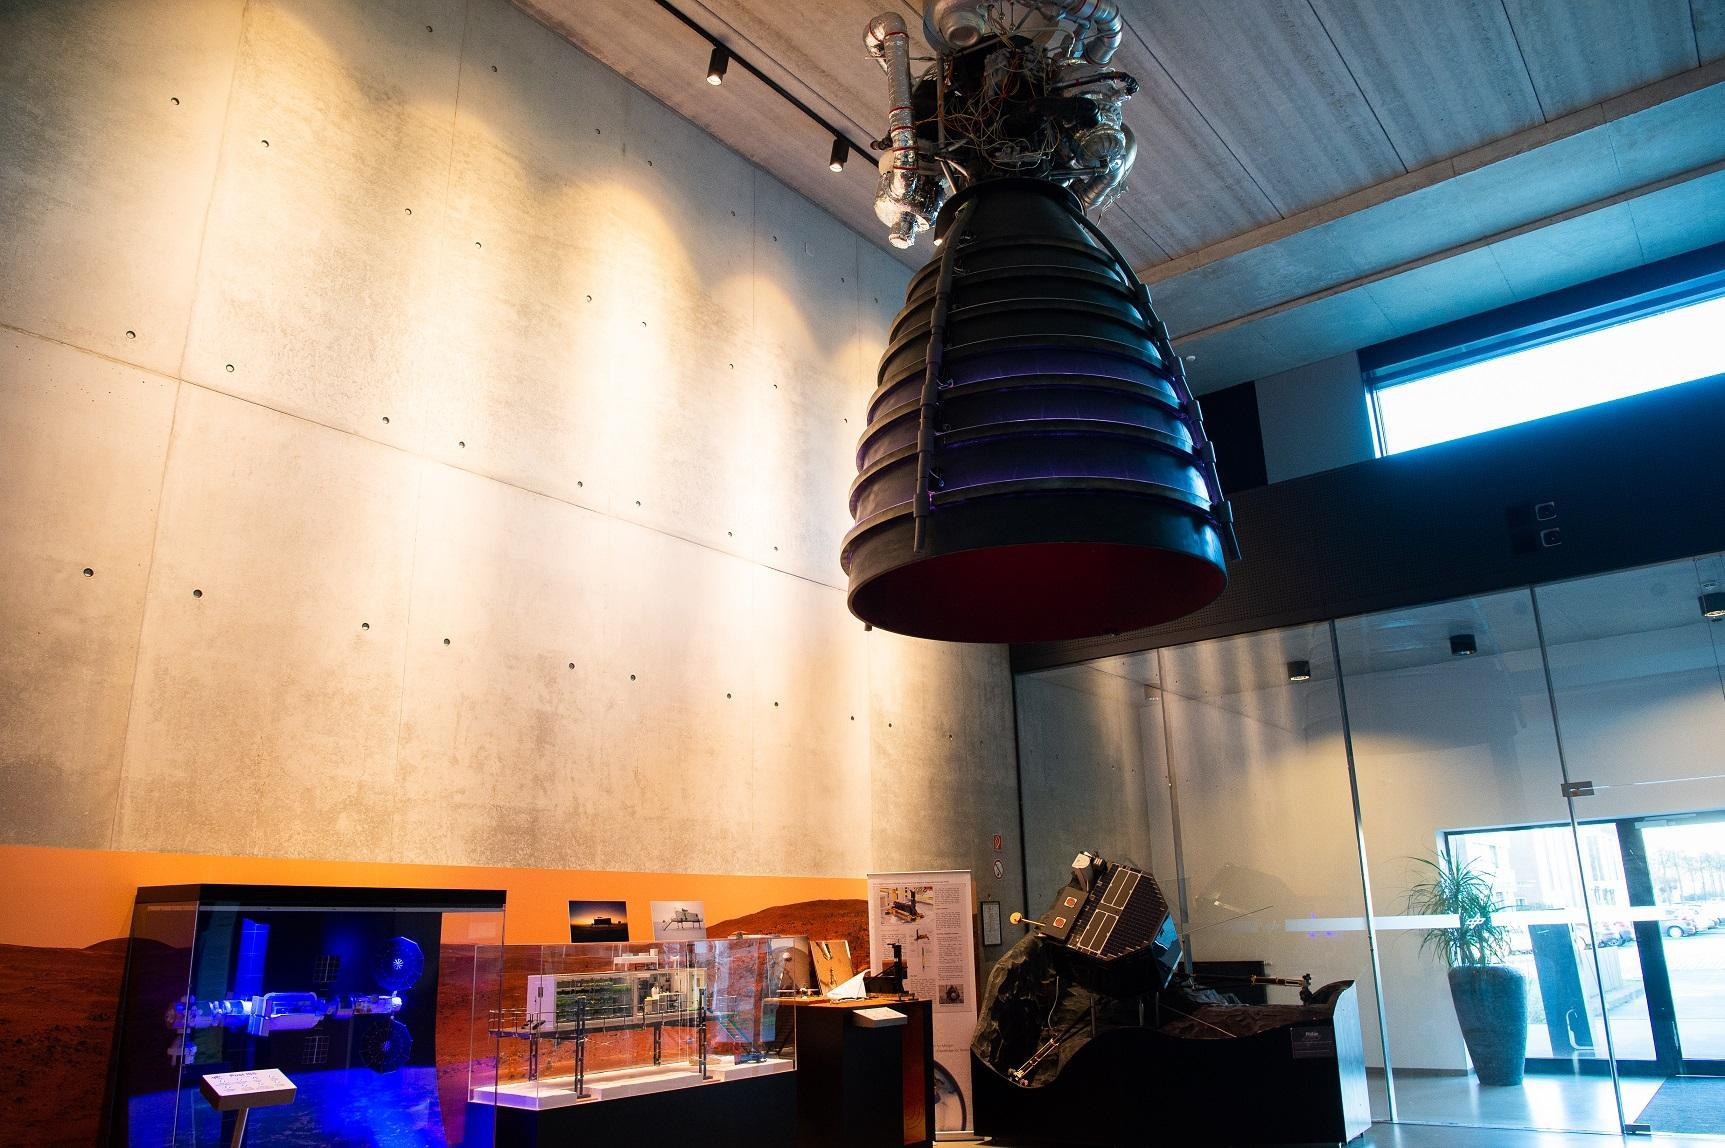 Exhibition at the DLR Institute of Space Systems